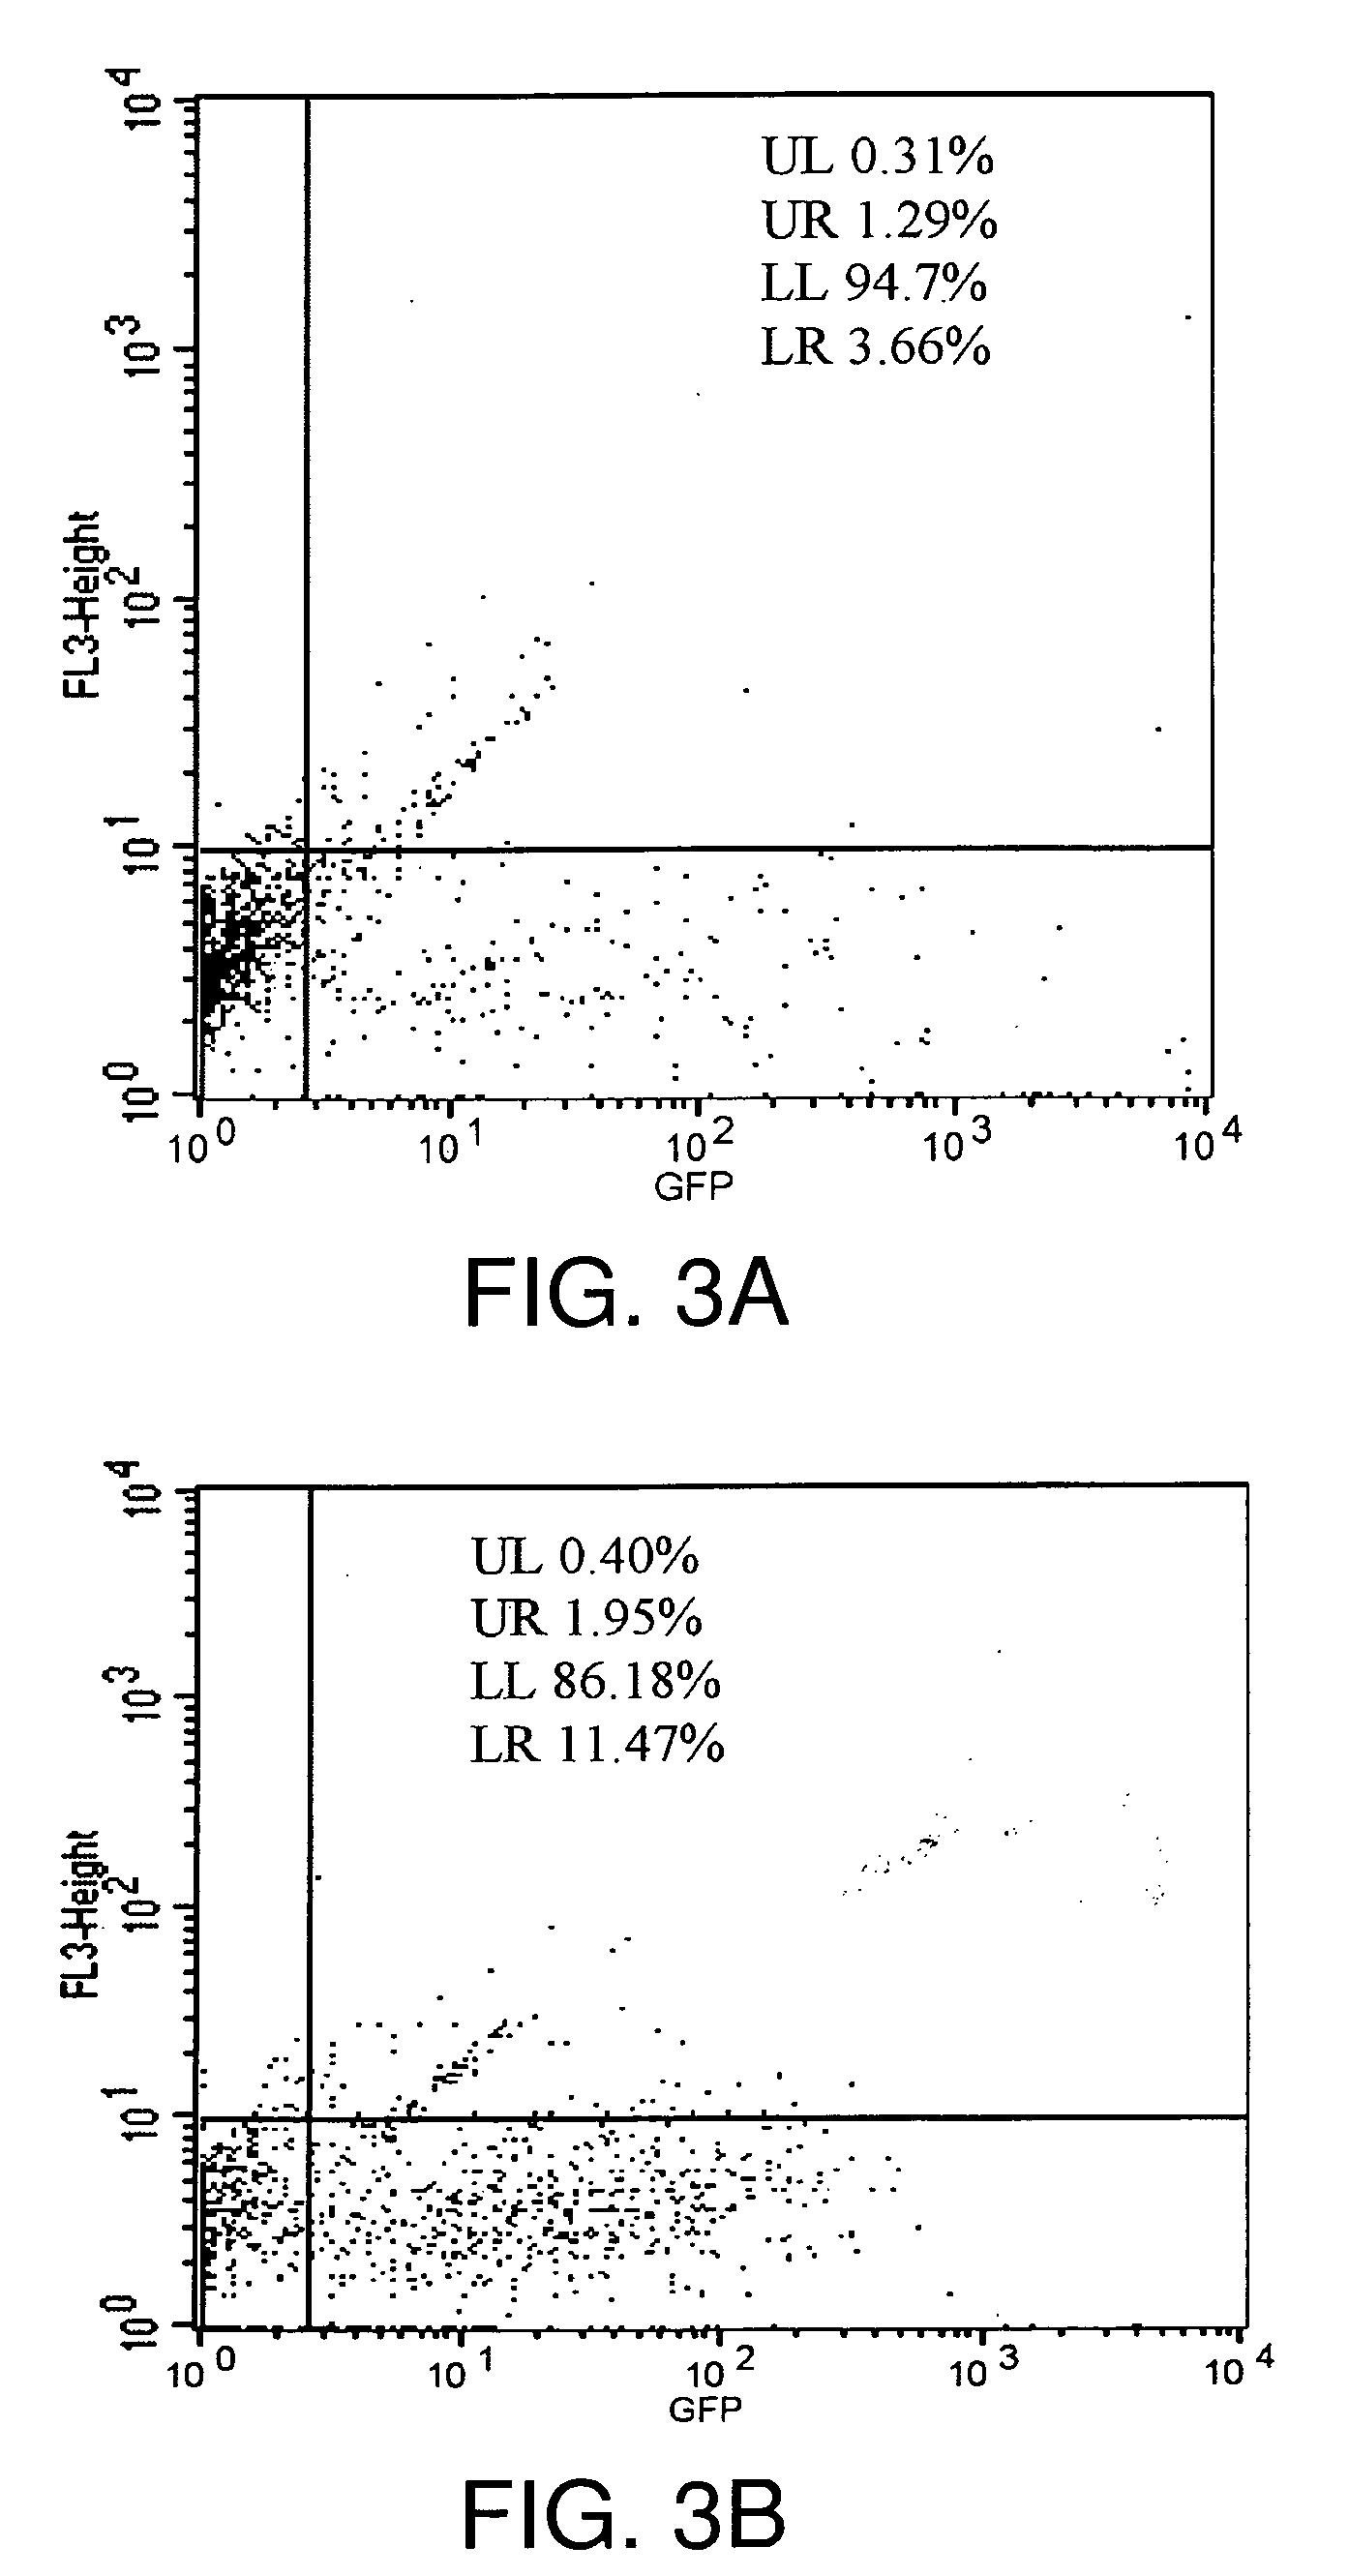 Methods and models for rapid, widespread delivery of genetic material to the CNS using non-viral, cationic lipid-mediated vectors